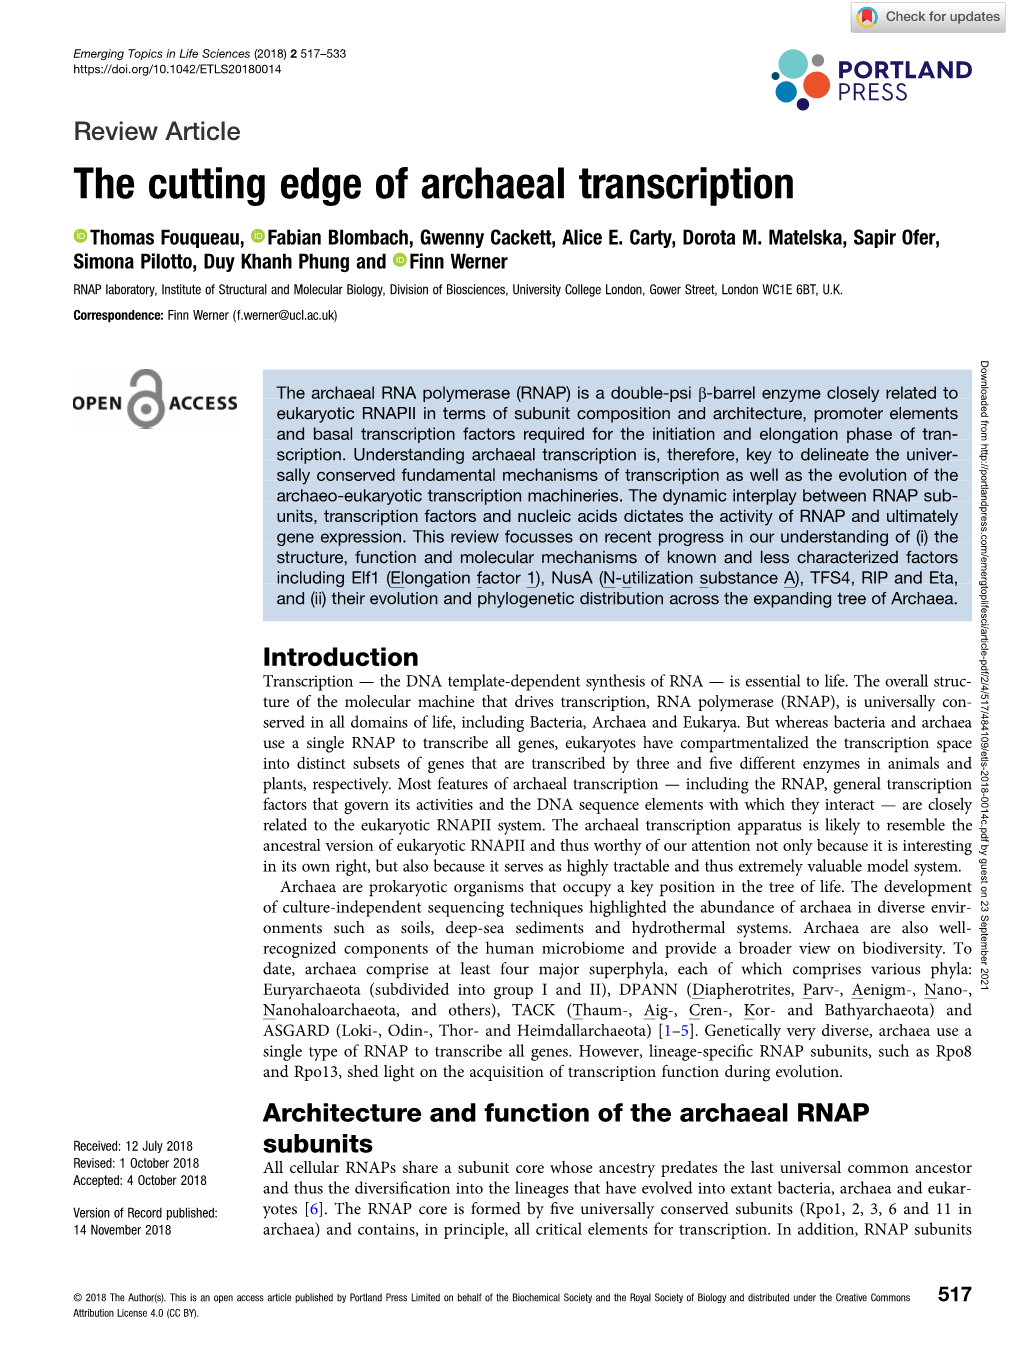 The Cutting Edge of Archaeal Transcription